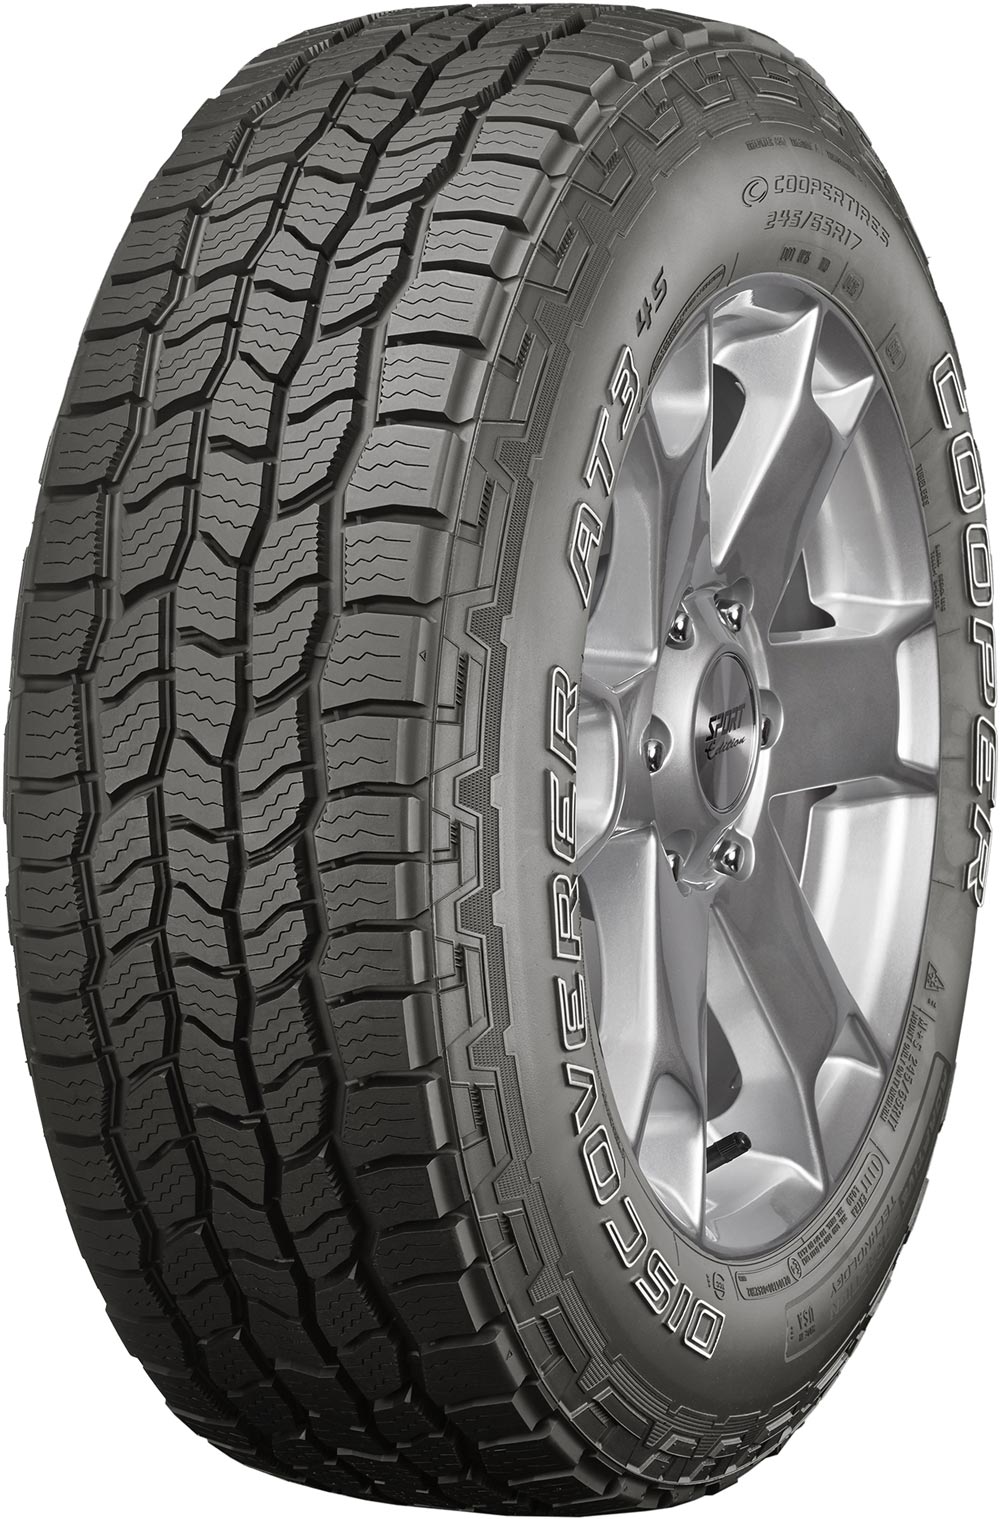 Гуми за джип COOPER DISCOVERER AT3 4S OWL 255/75 R17 115T